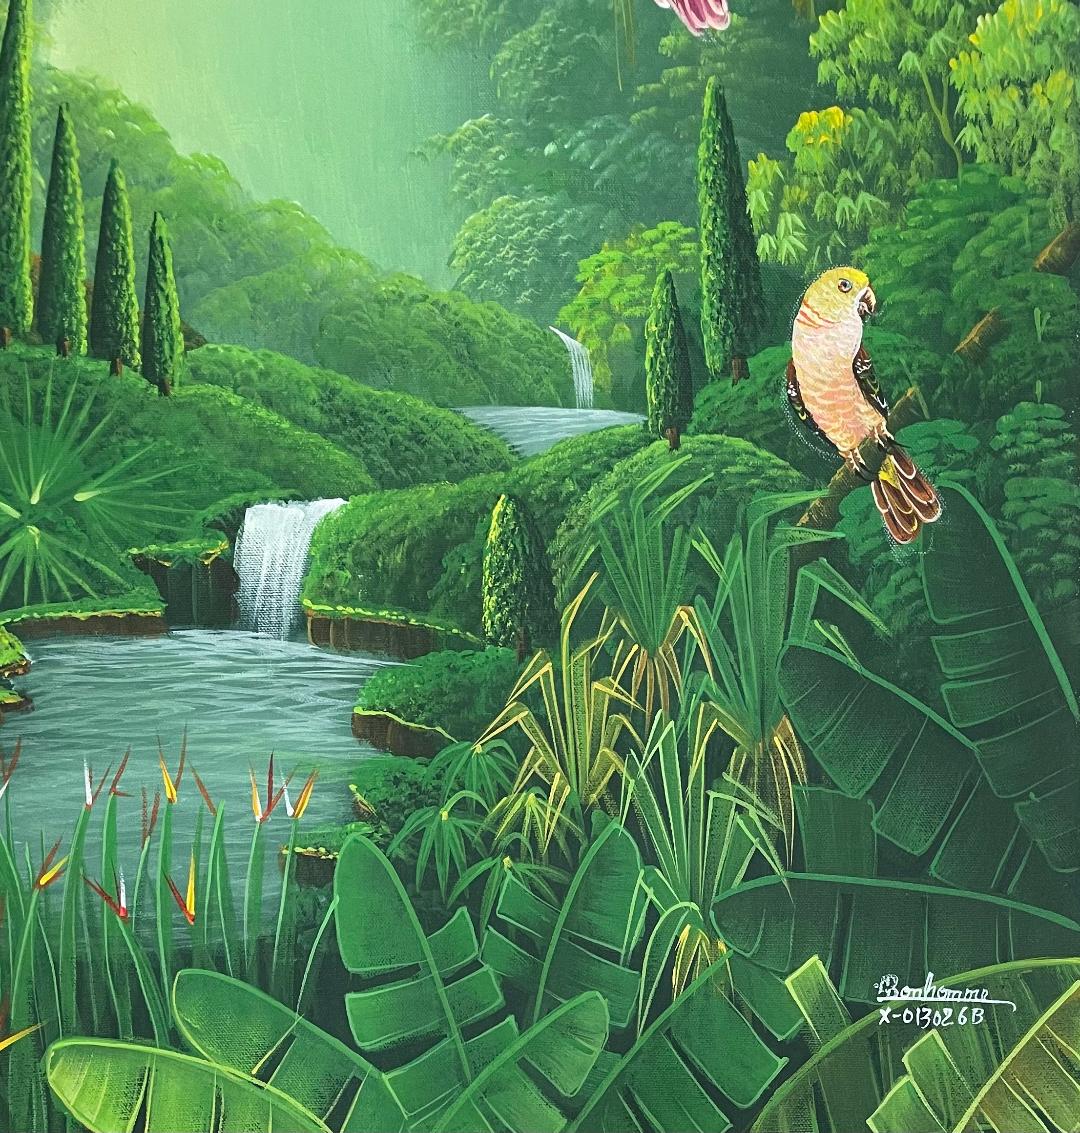 Albott Bonhomme 24"x20" Three Birds In Tropical Jungle With Cascade & Trees 2022 Acrylic on Canvas Painting #31MFN